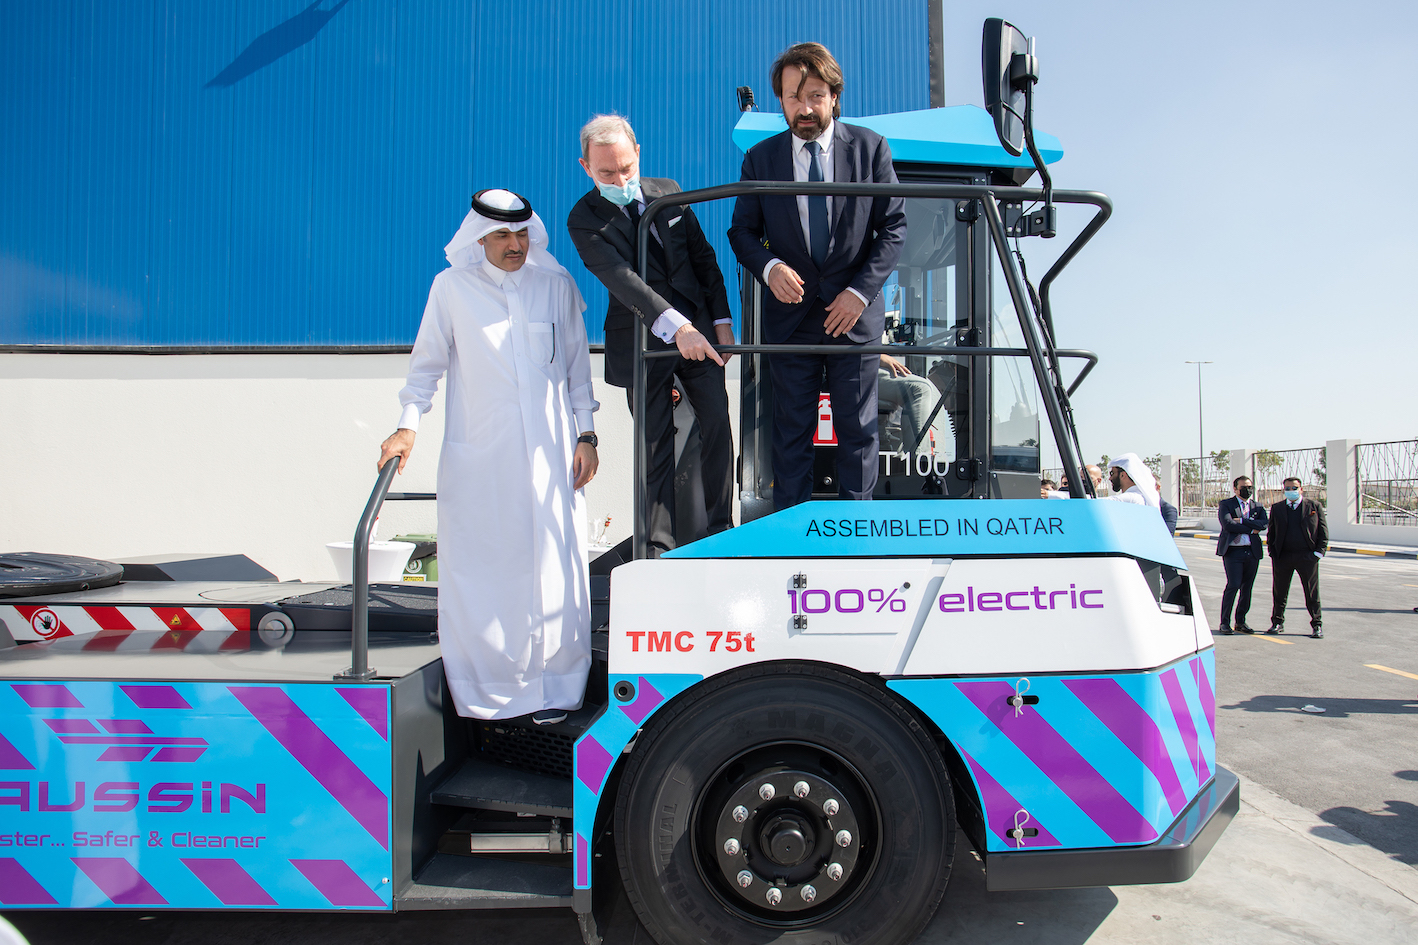 First e-Vehicles Made in Qatar Tested at Ras Bufontas Free Zone